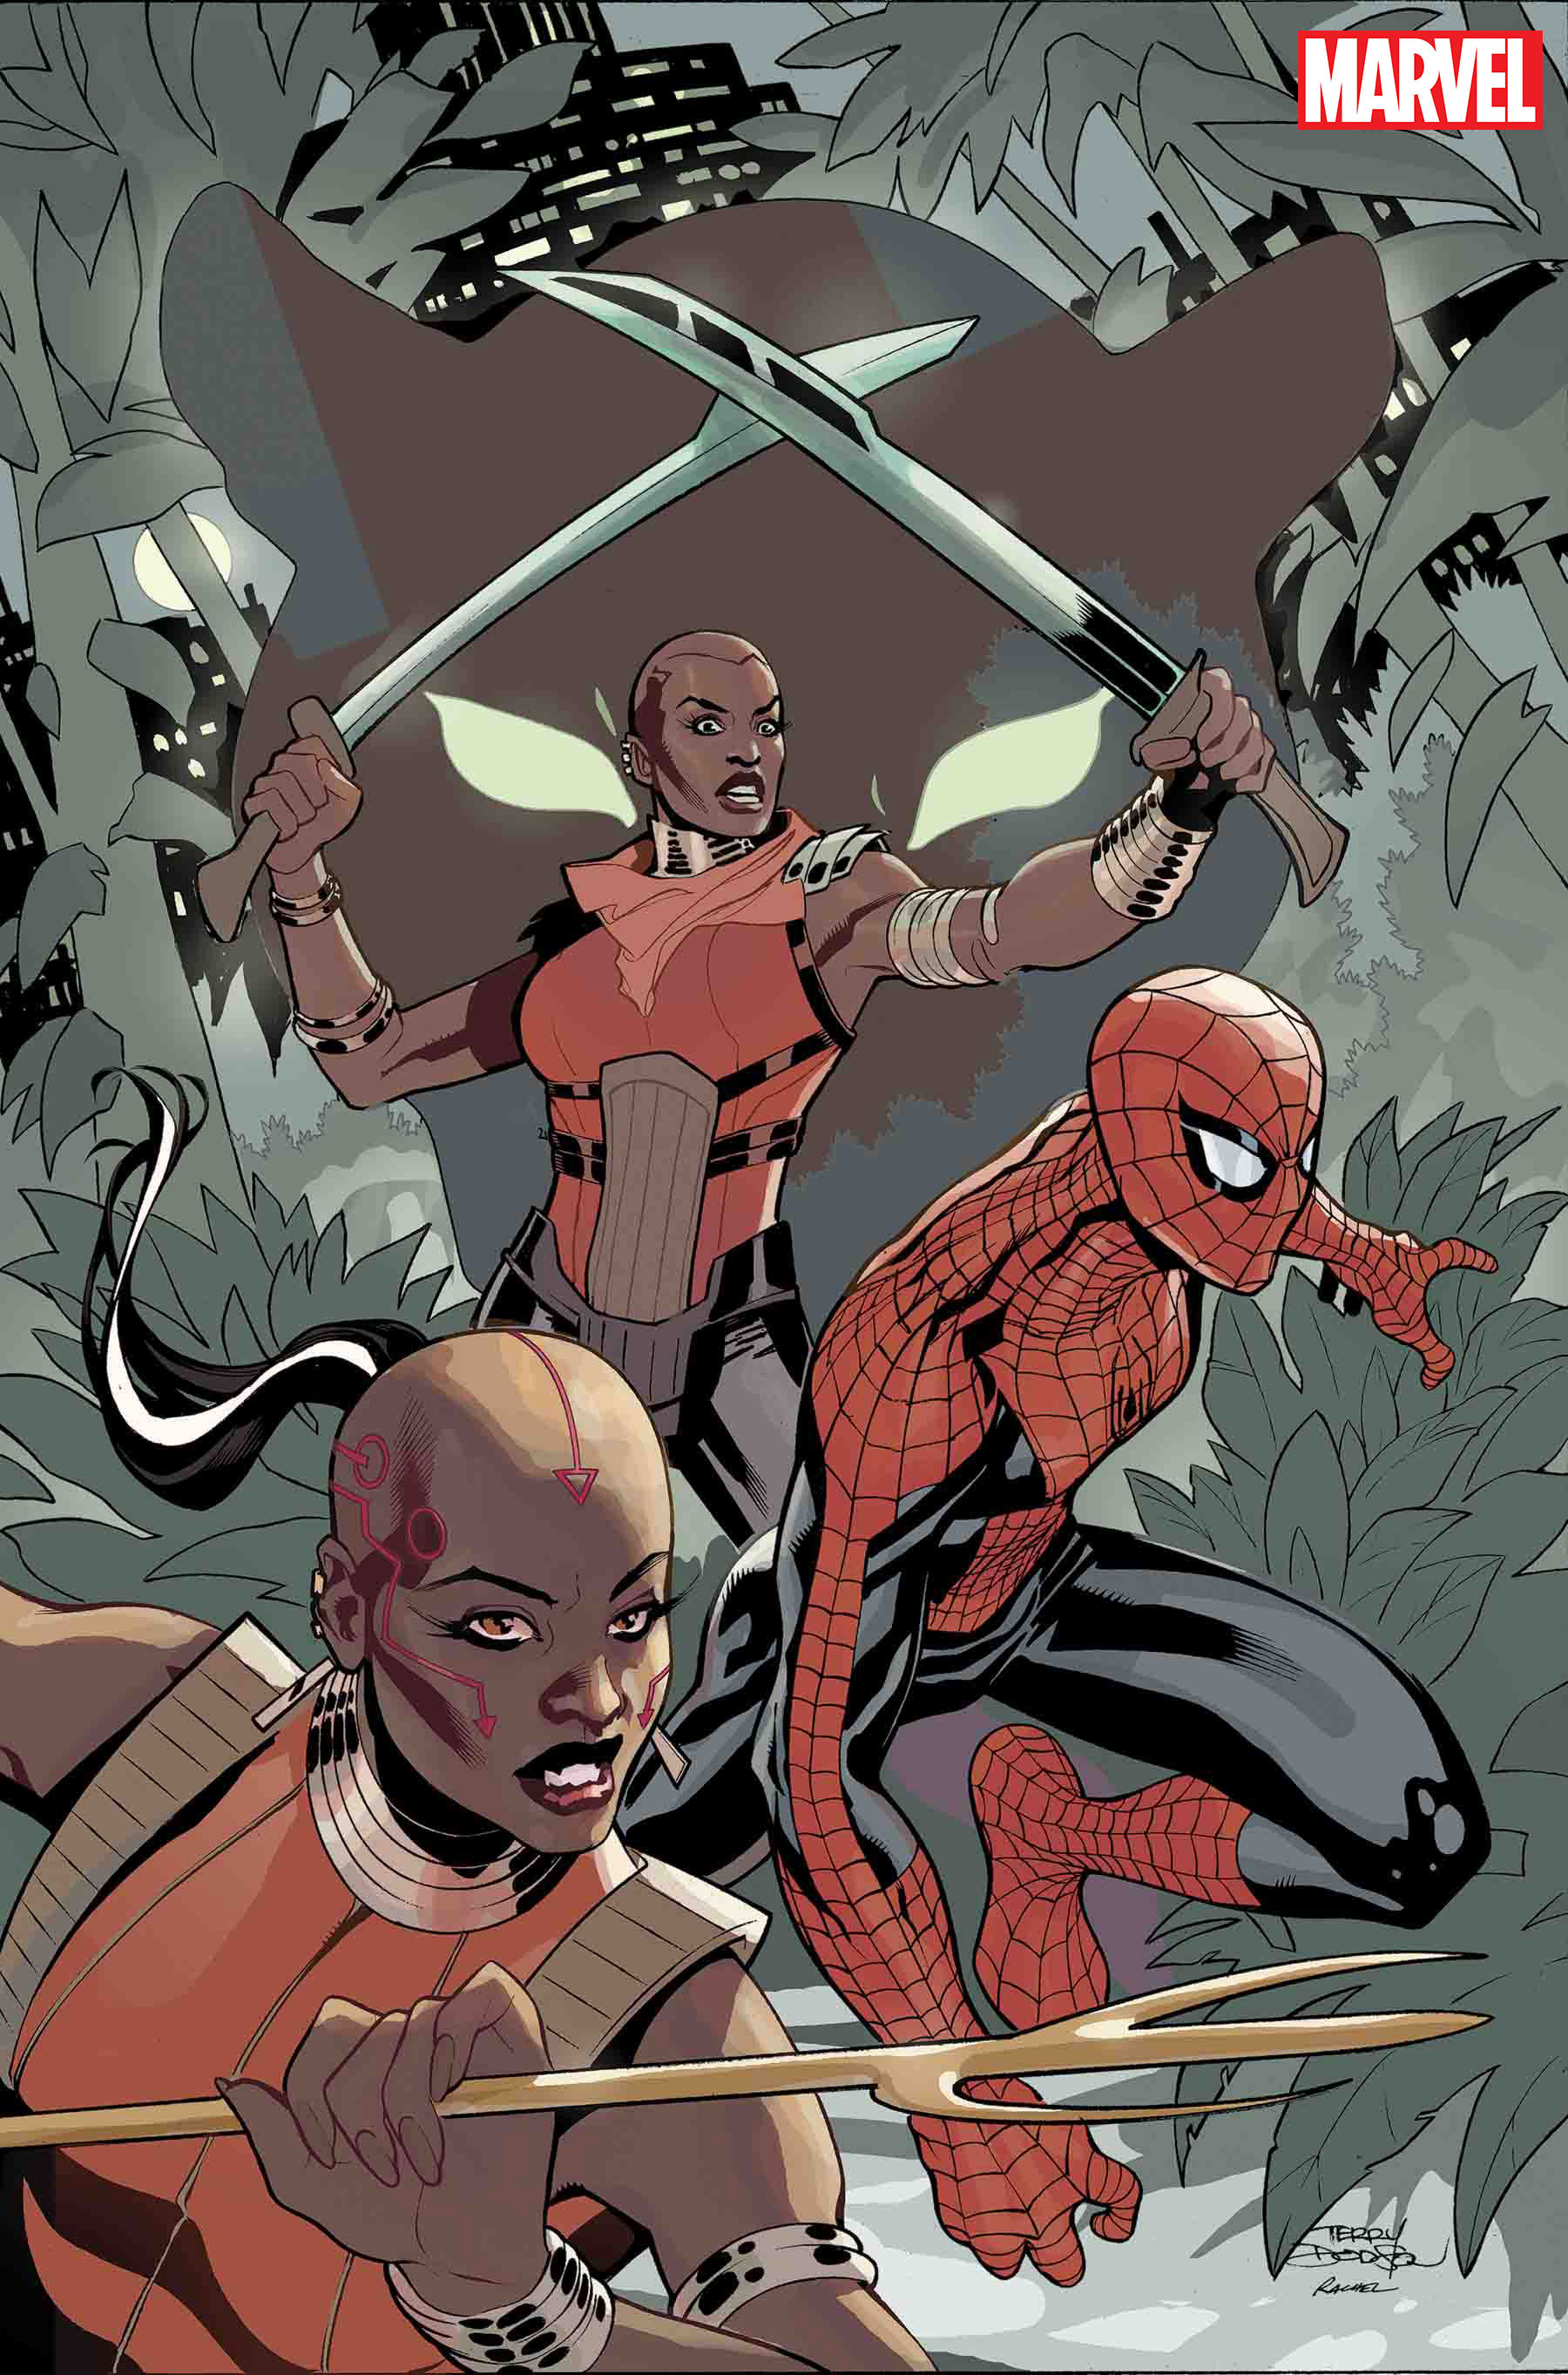 AMAZING SPIDER-MAN: WAKANDA FOREVER #1 cover by Terry Dodson